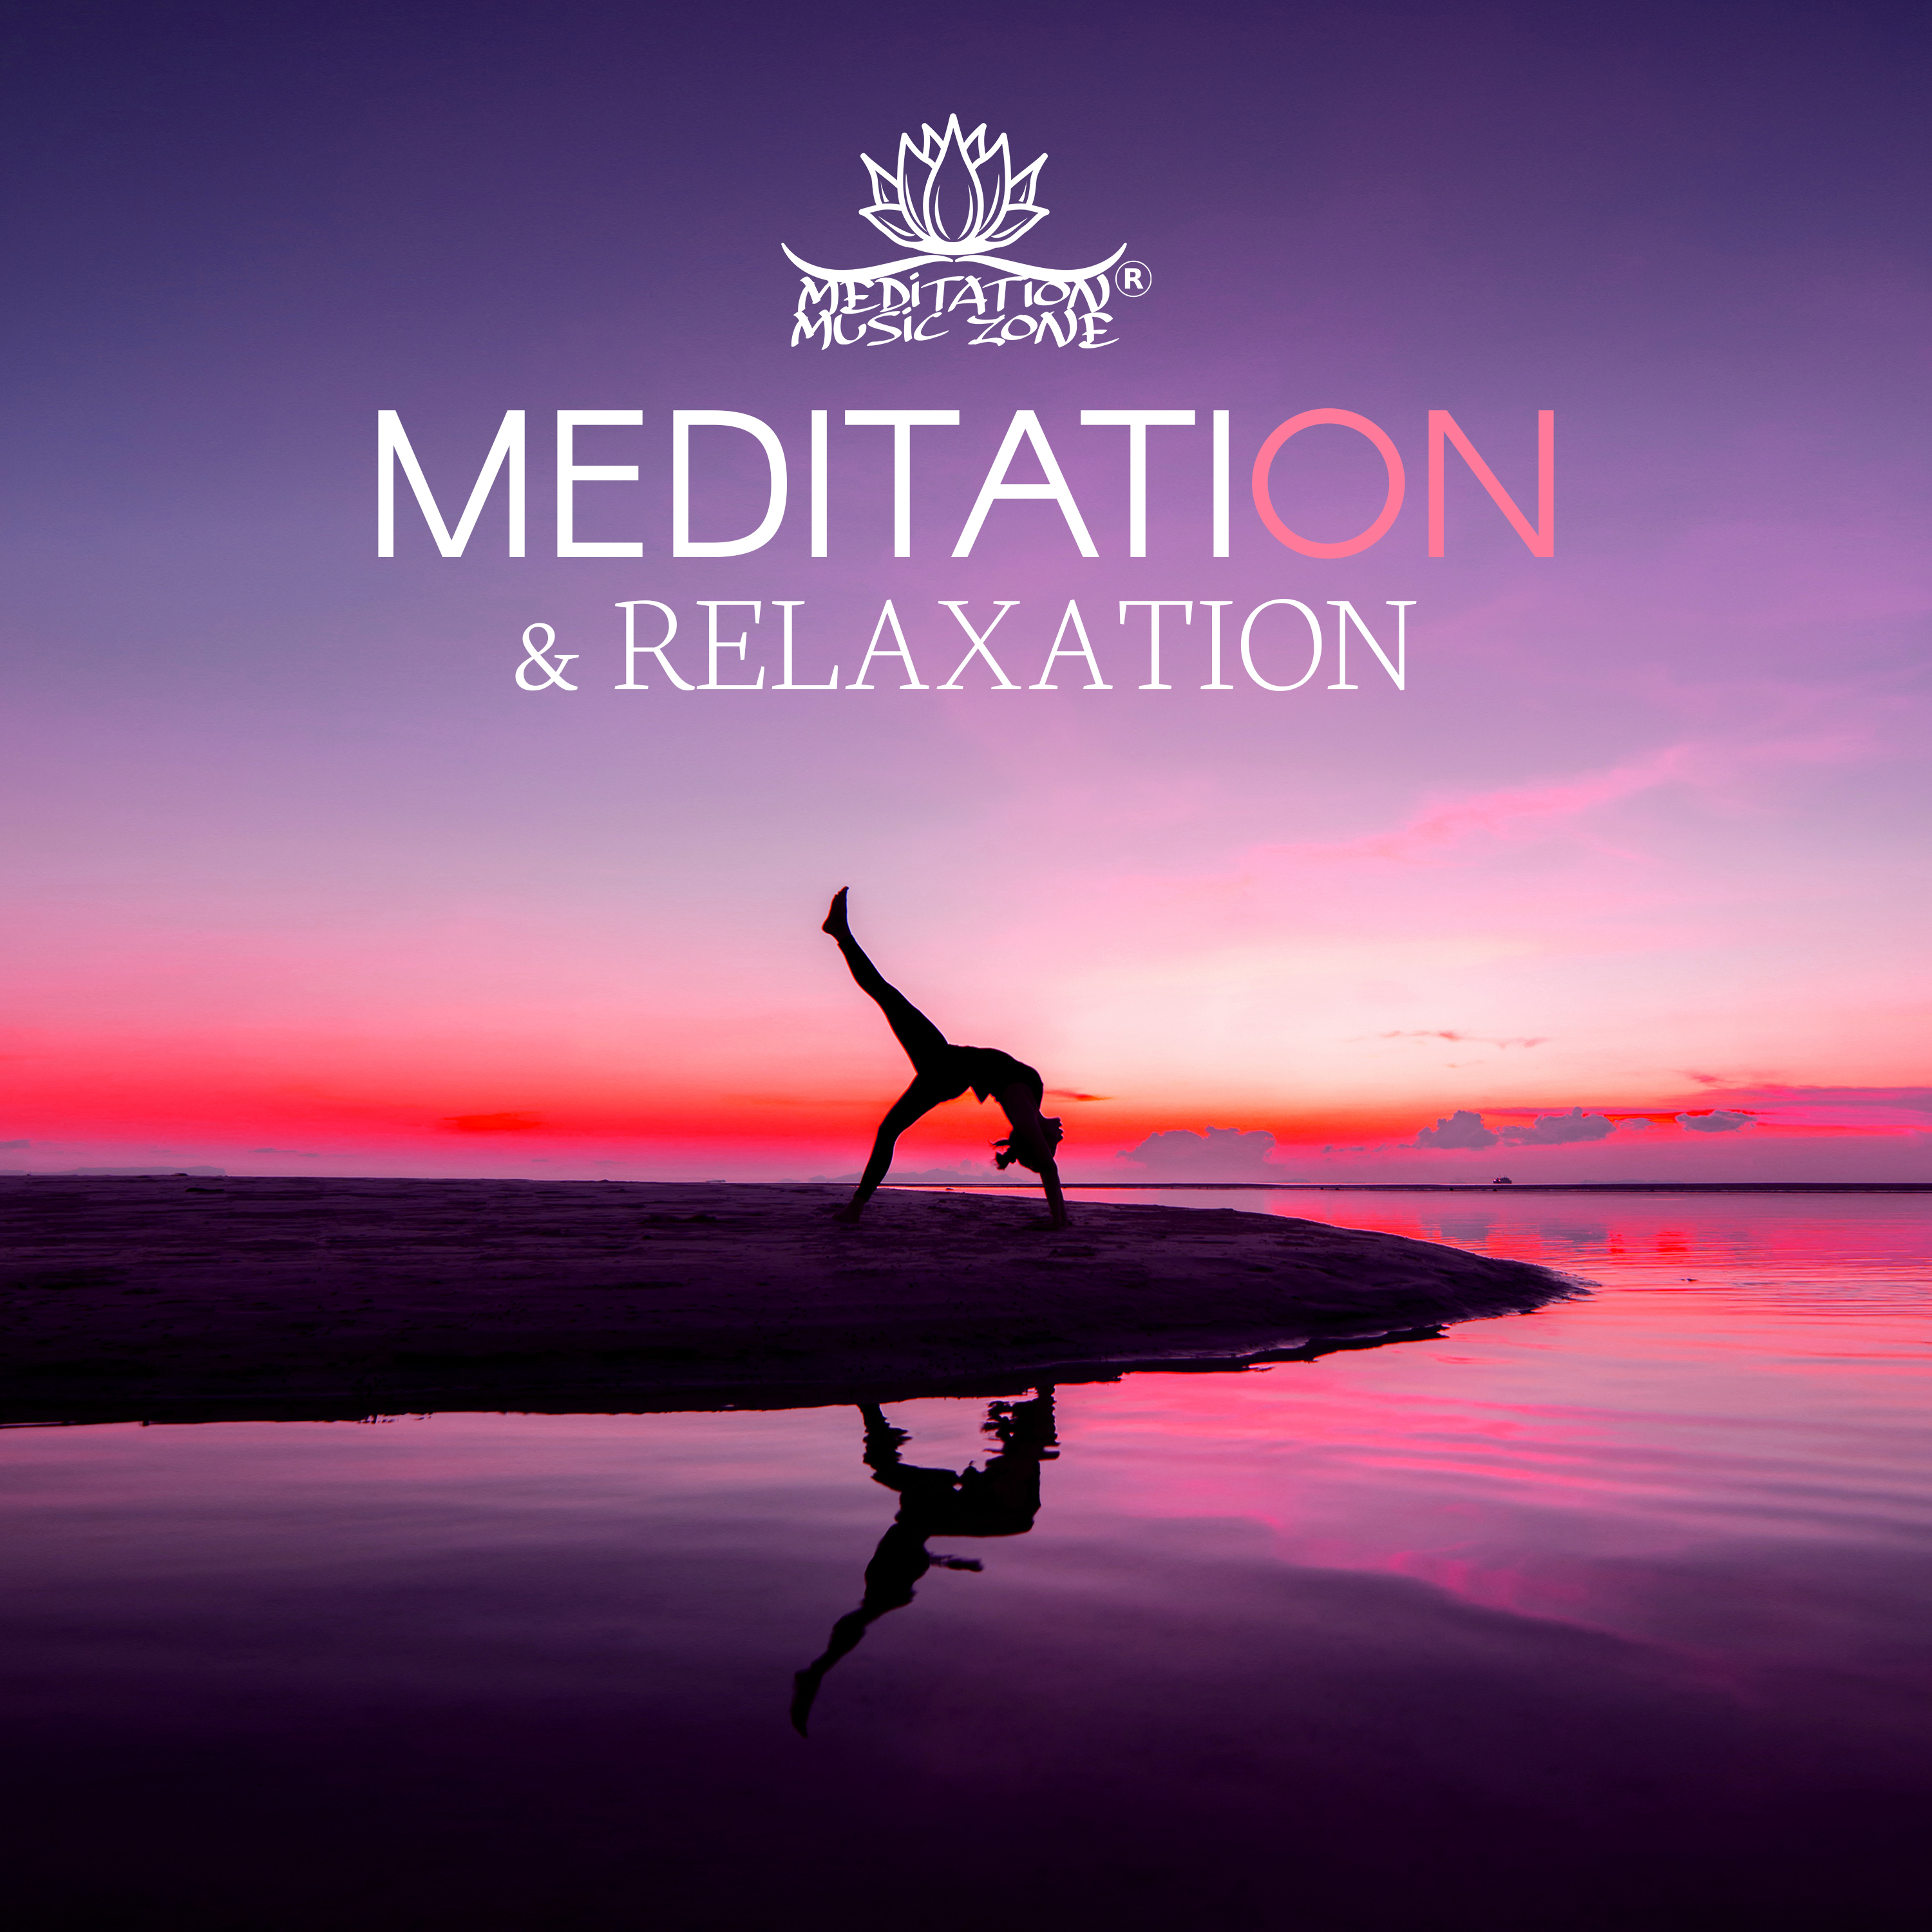 Meditation & Relaxation (Top 2018 New Age Music, Easy Listening & Total Relax)